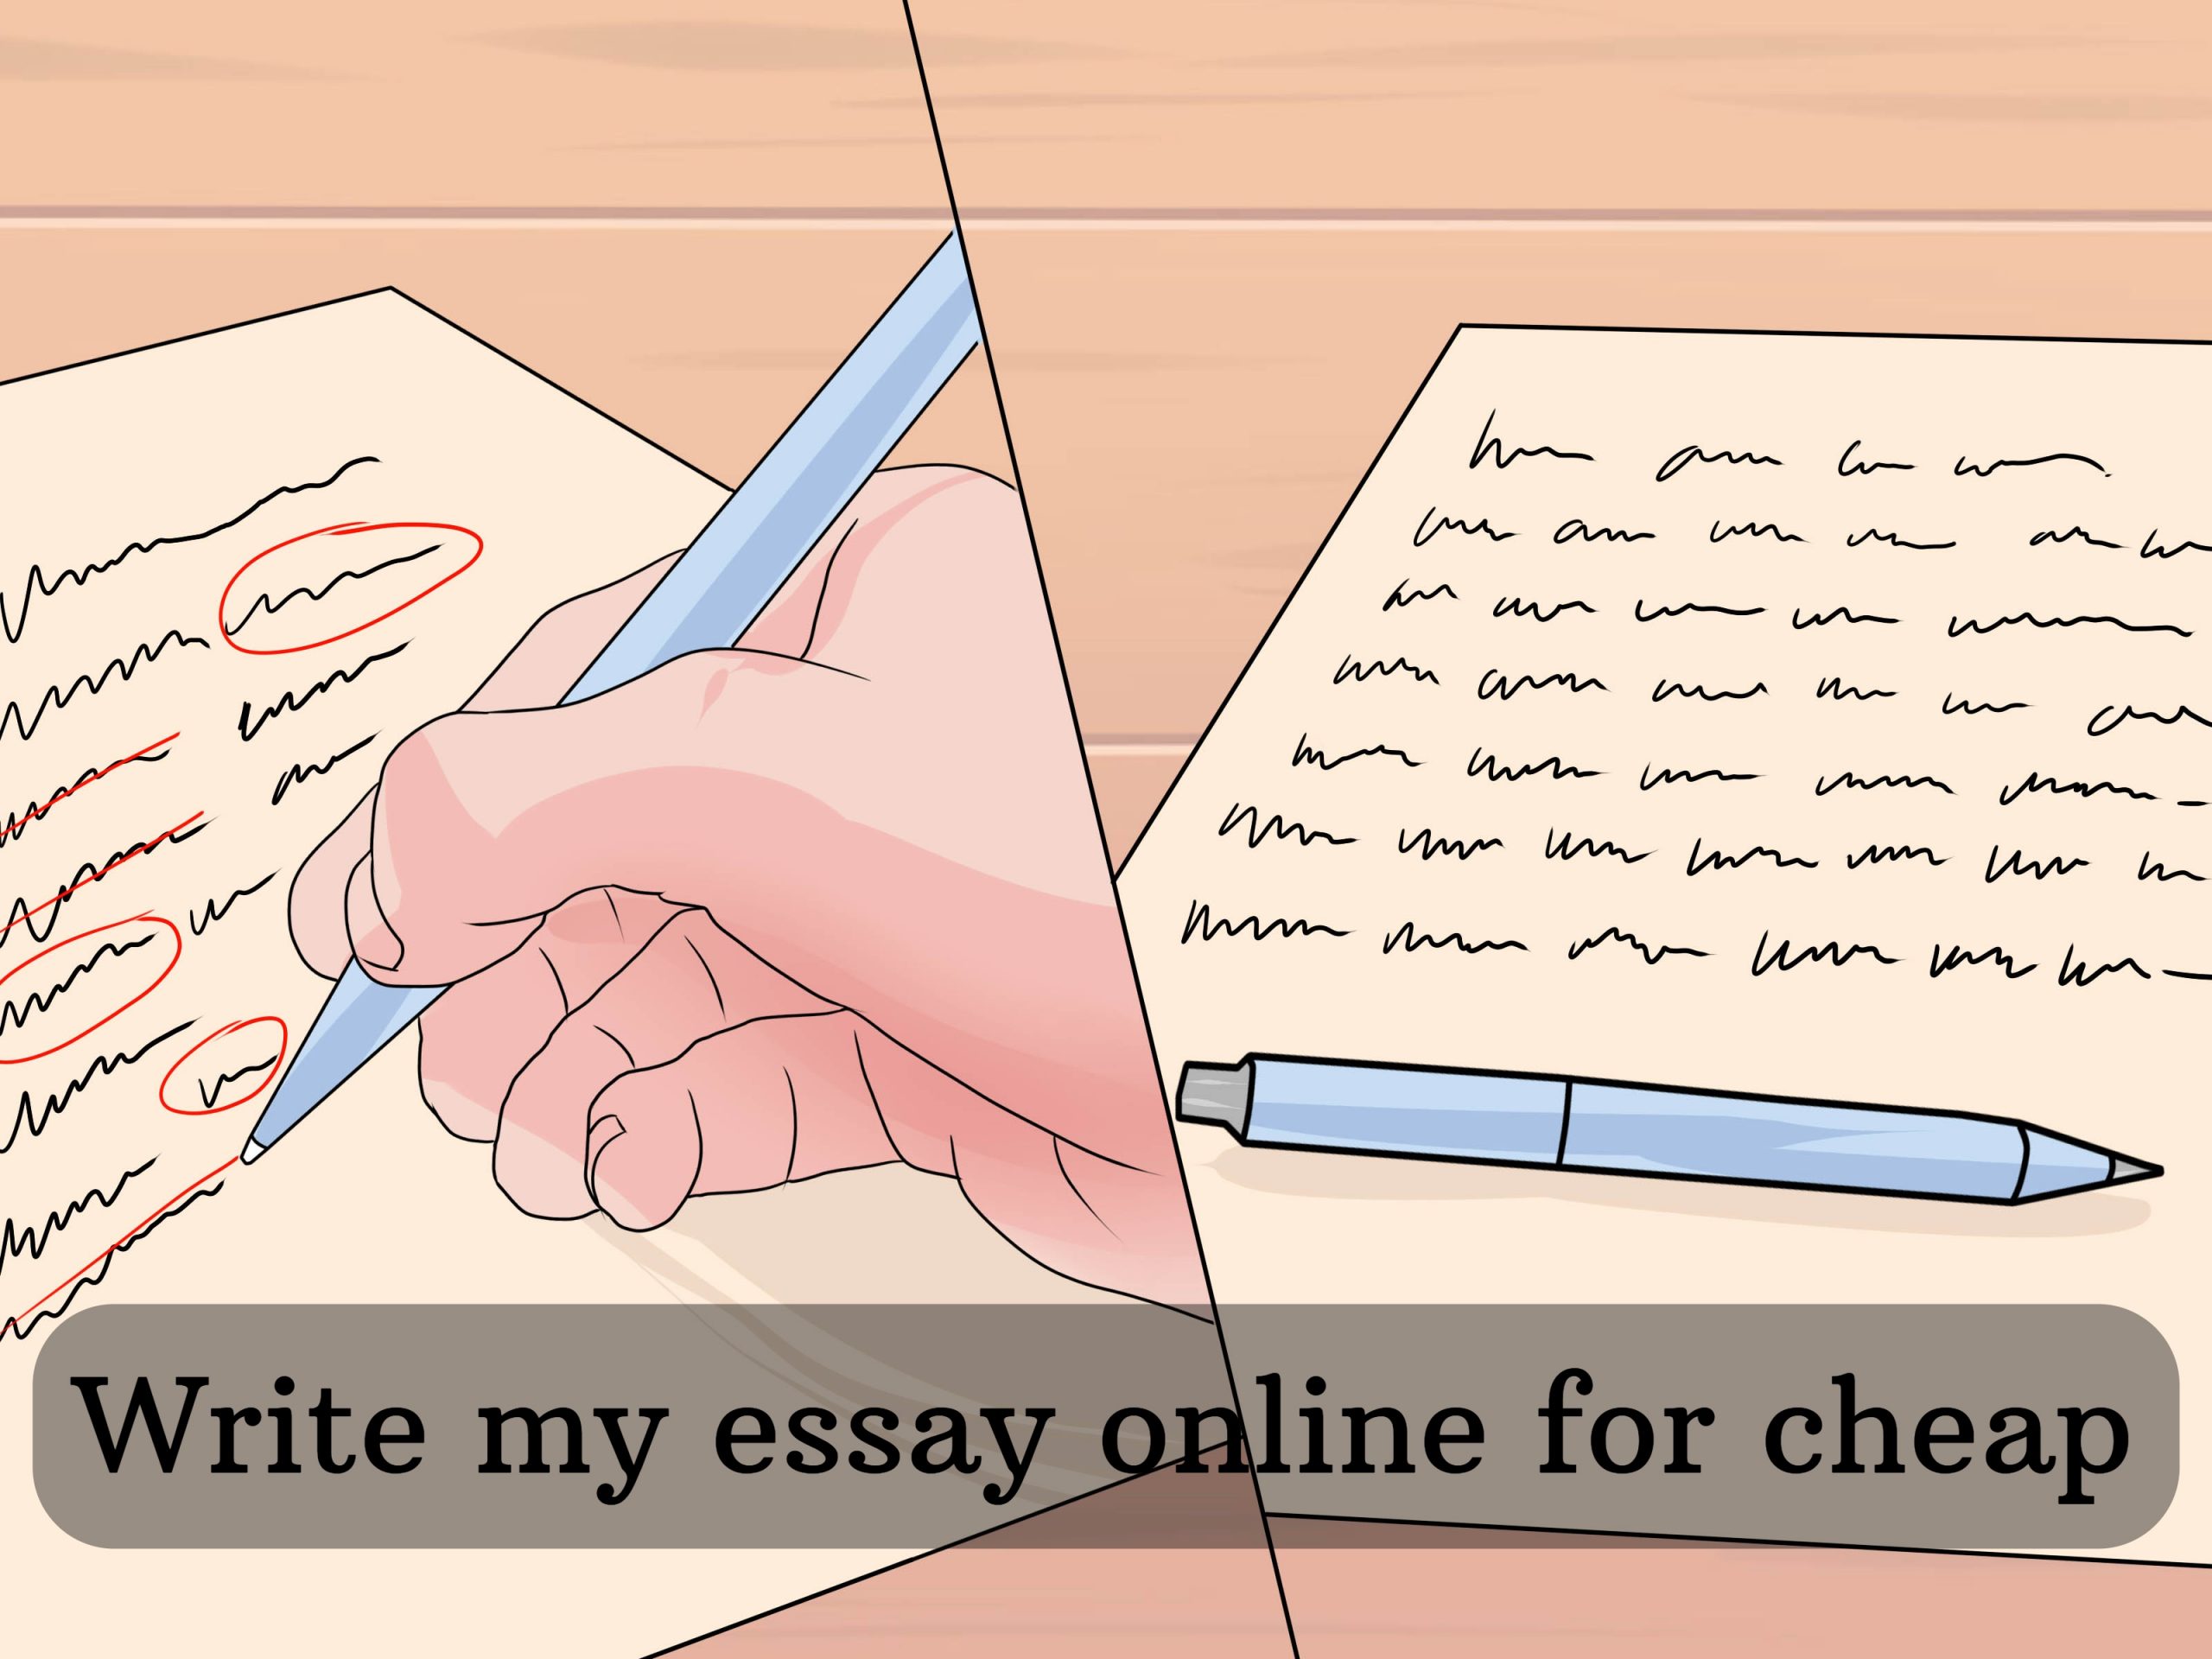 Write my essay online for cheap